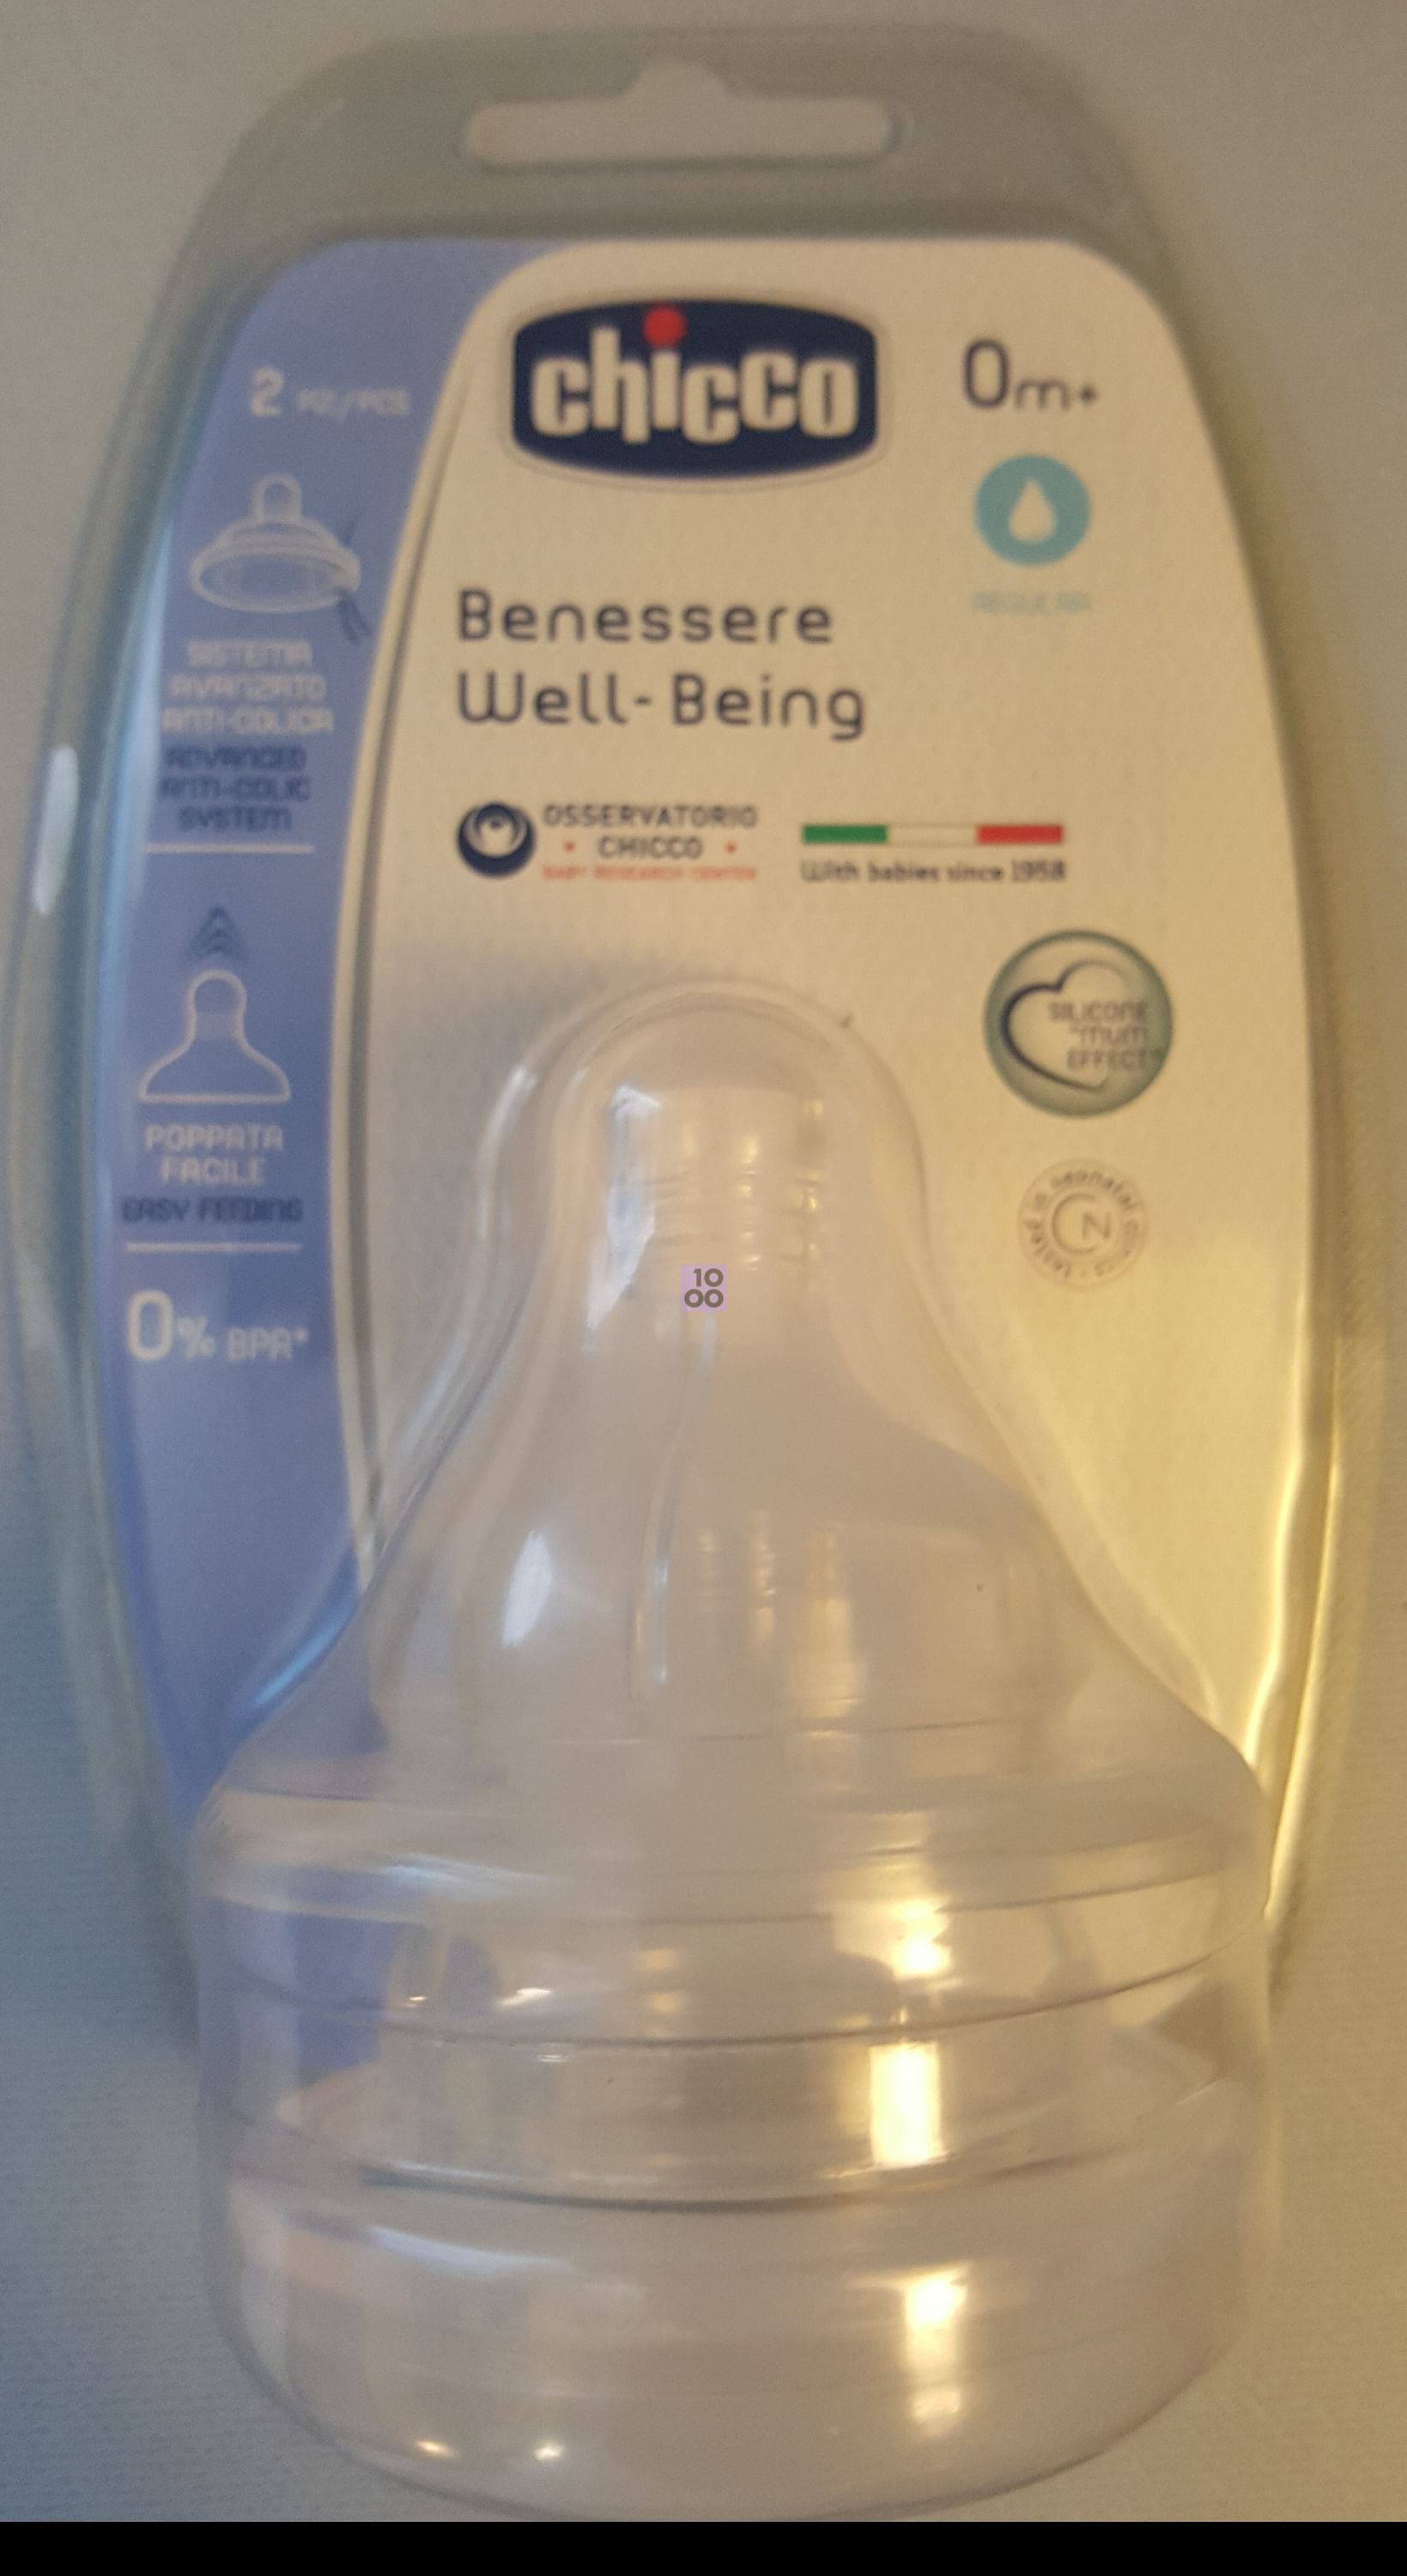 Chicco Tettarella Well Being 0 Mesi Normal Silicone 2 Pezzi 